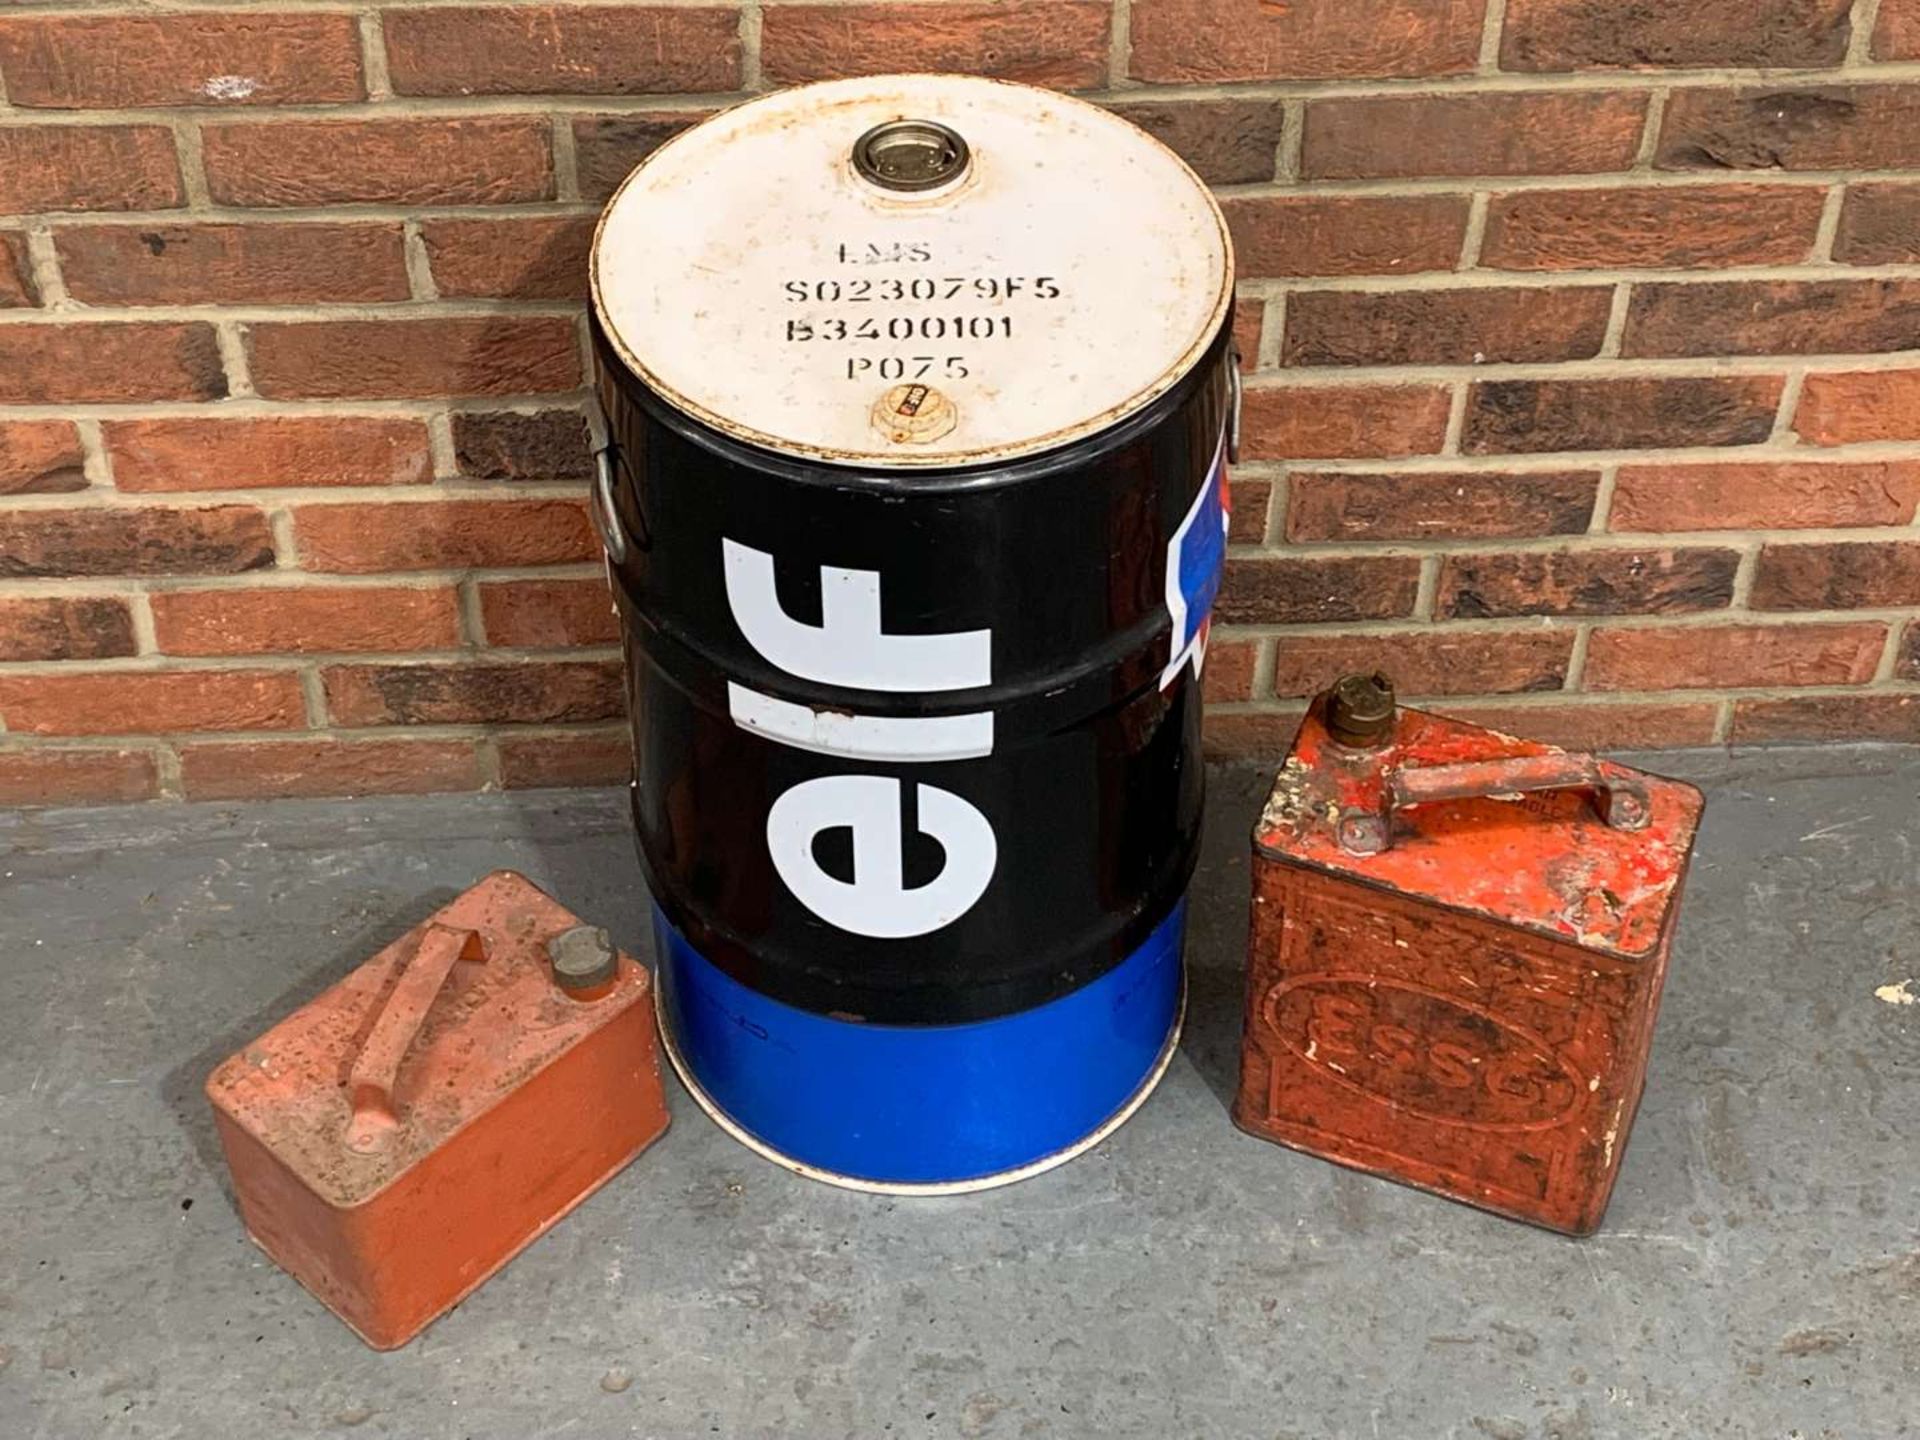 Ex Lotus F1 Fuel Drum and Two Fuel Cans (3) - Image 2 of 2